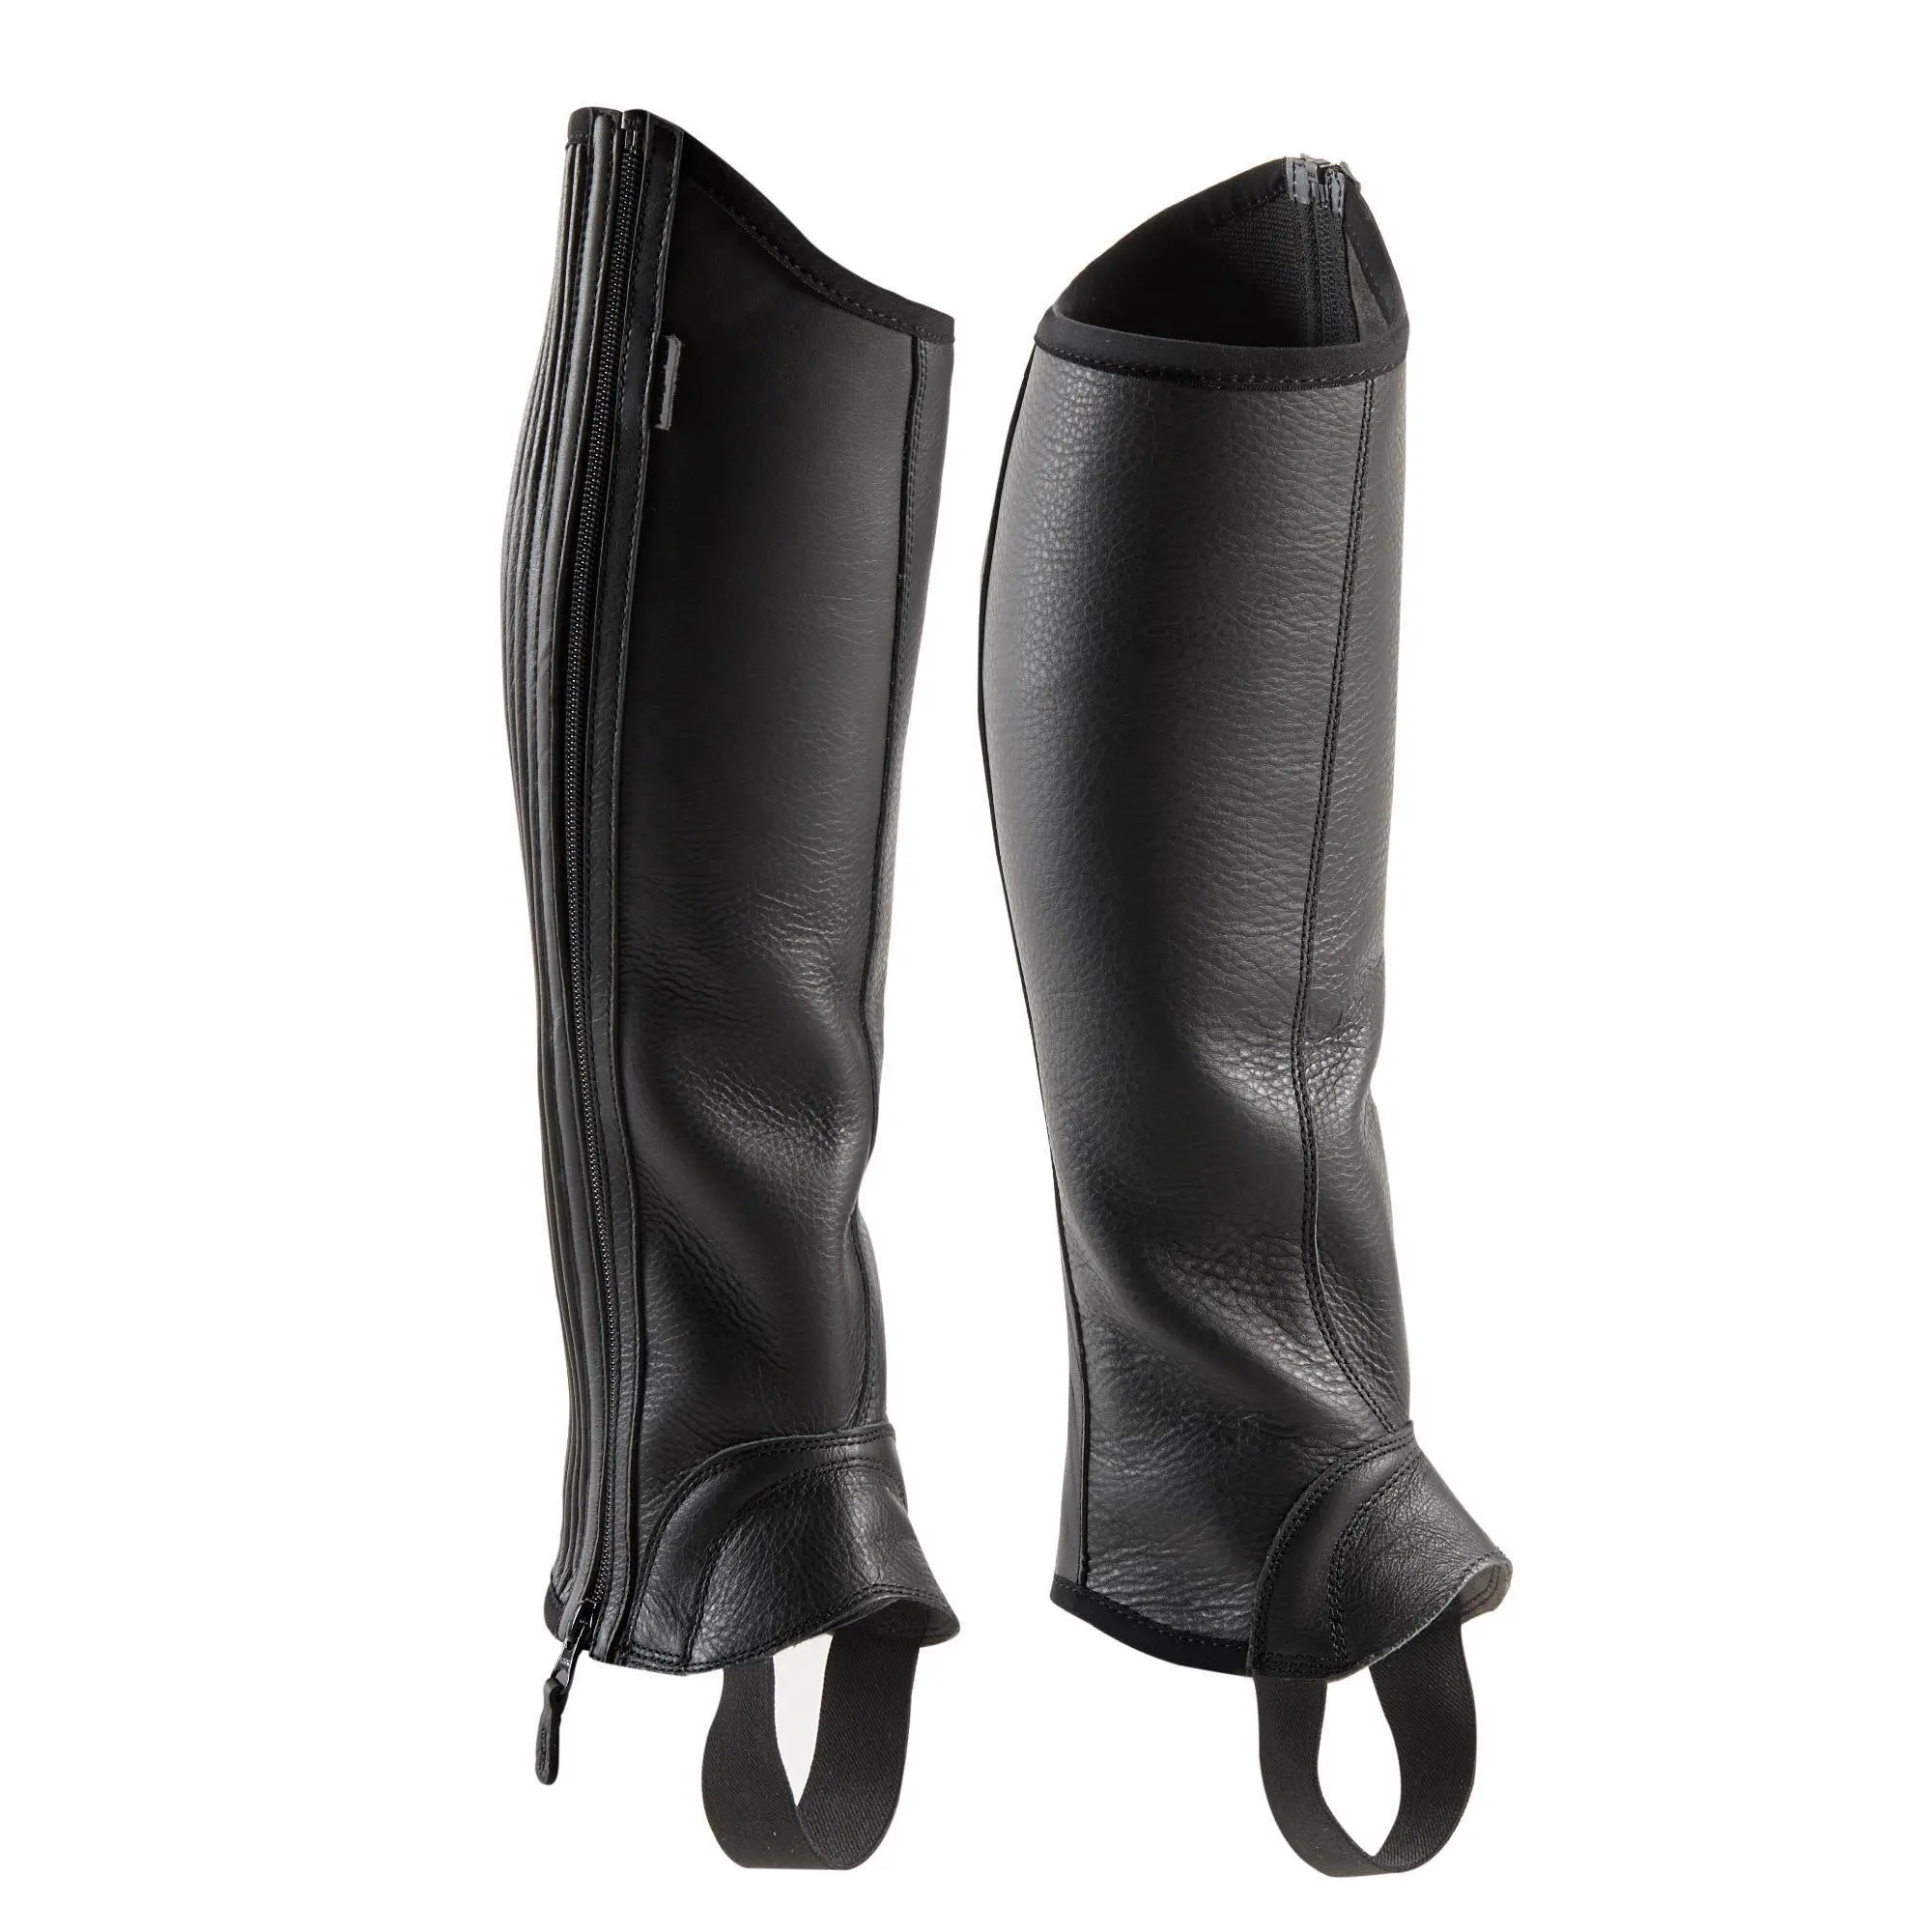 Soft Leather English Black Leather Horse Riding All Purpose Gaiters Half Leather Chaps Gusset Bulk